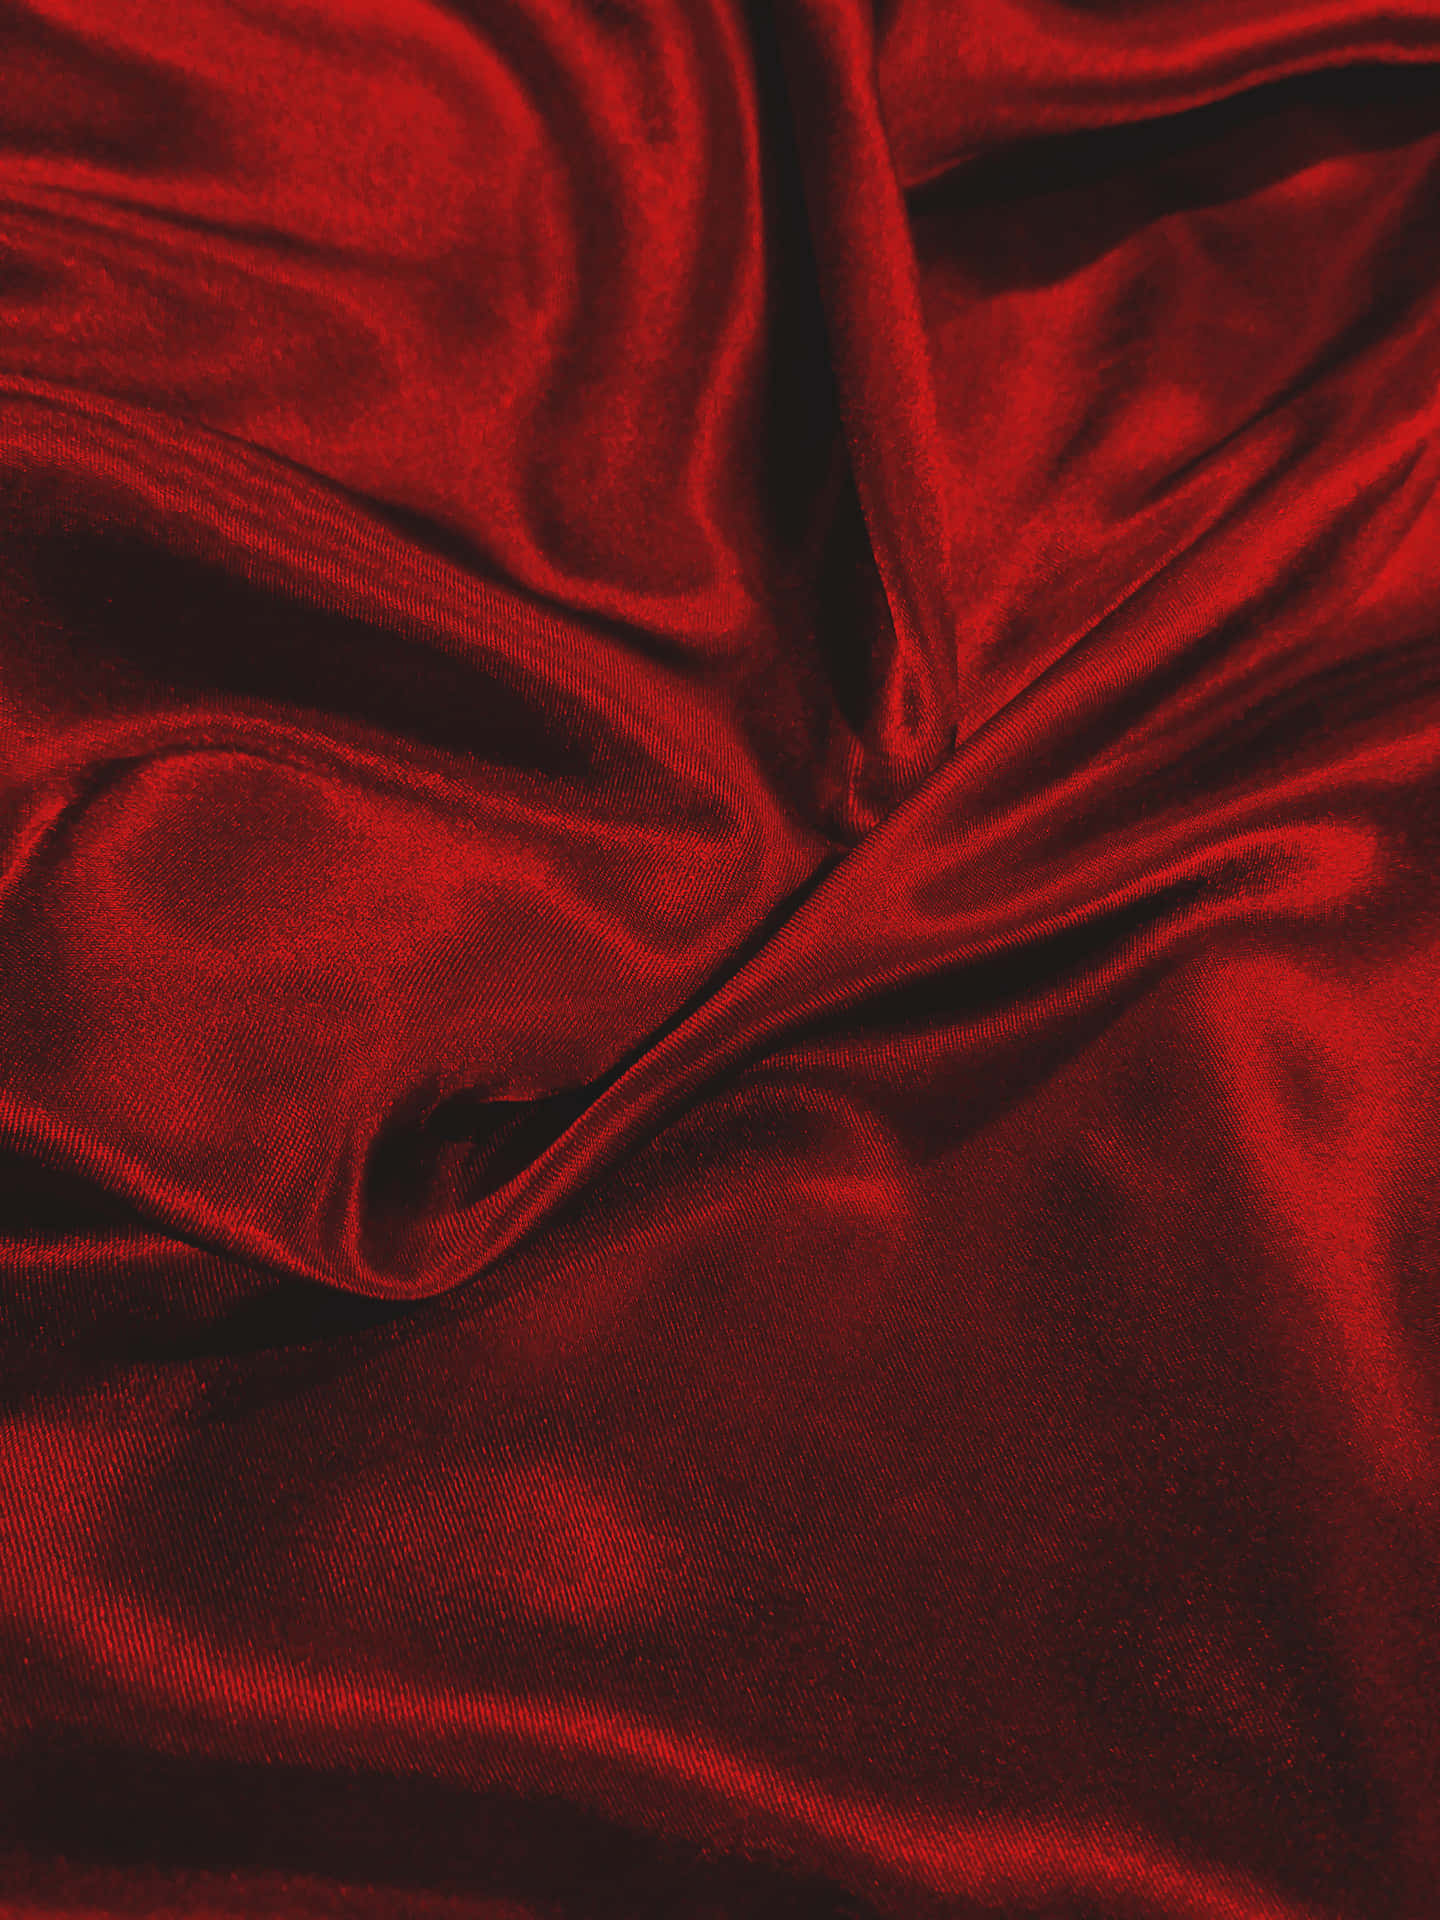 Red Satin Fabric Background Wallpaper